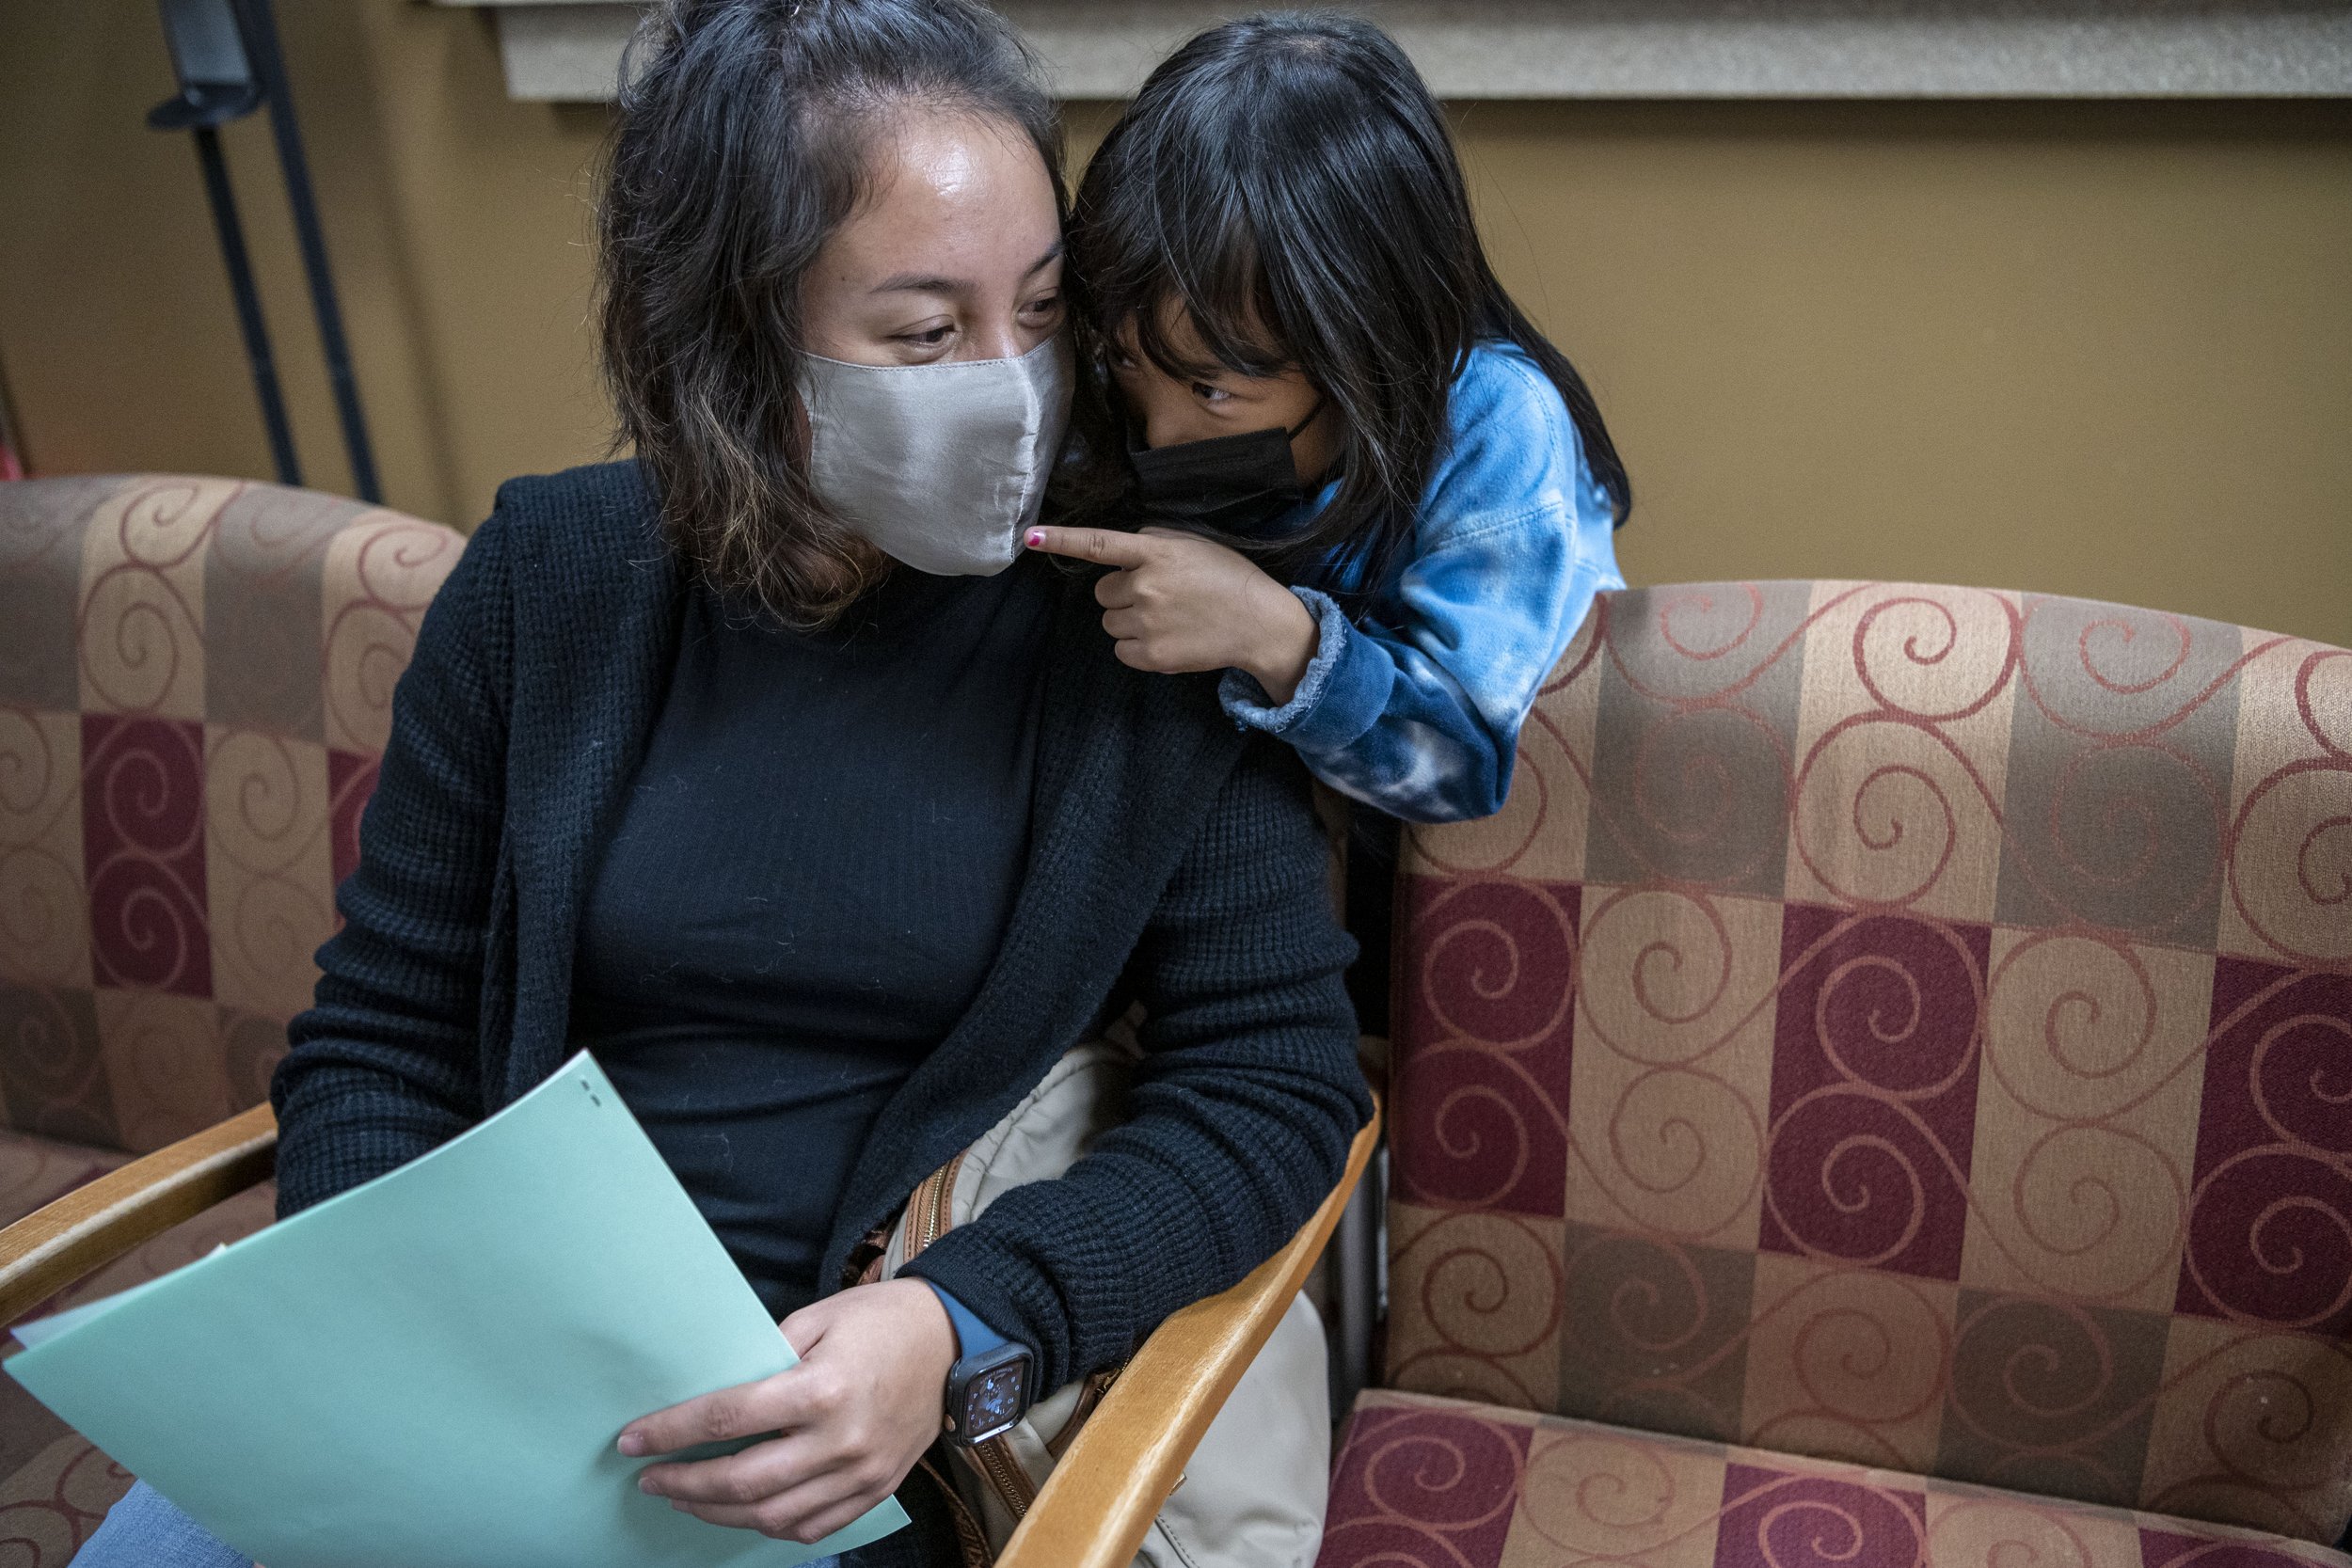  Tu Par waits the required 15 minutes after her daughter Abigail Par, 6, receives Pfizer’s COVID-19 vaccine at the Toeller building in Battle Creek, Michigan on Monday, Nov. 8. Children ages 5-11 are now eligible to receive Pfizer’s COVID-19 vaccine.